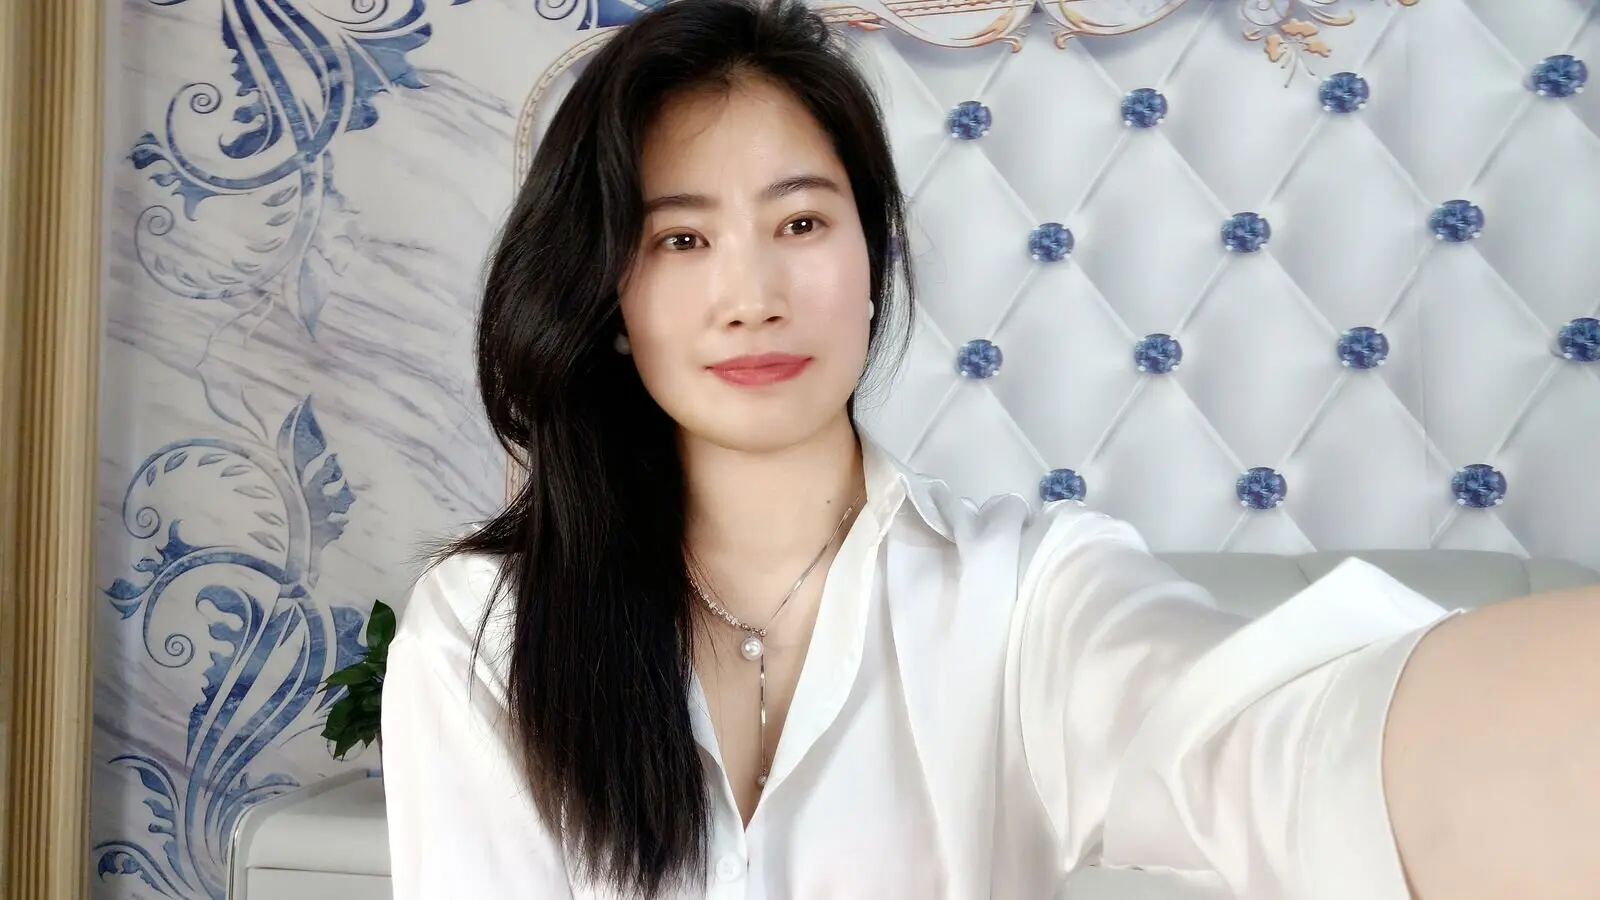 DaisyFeng Cumshow Vip